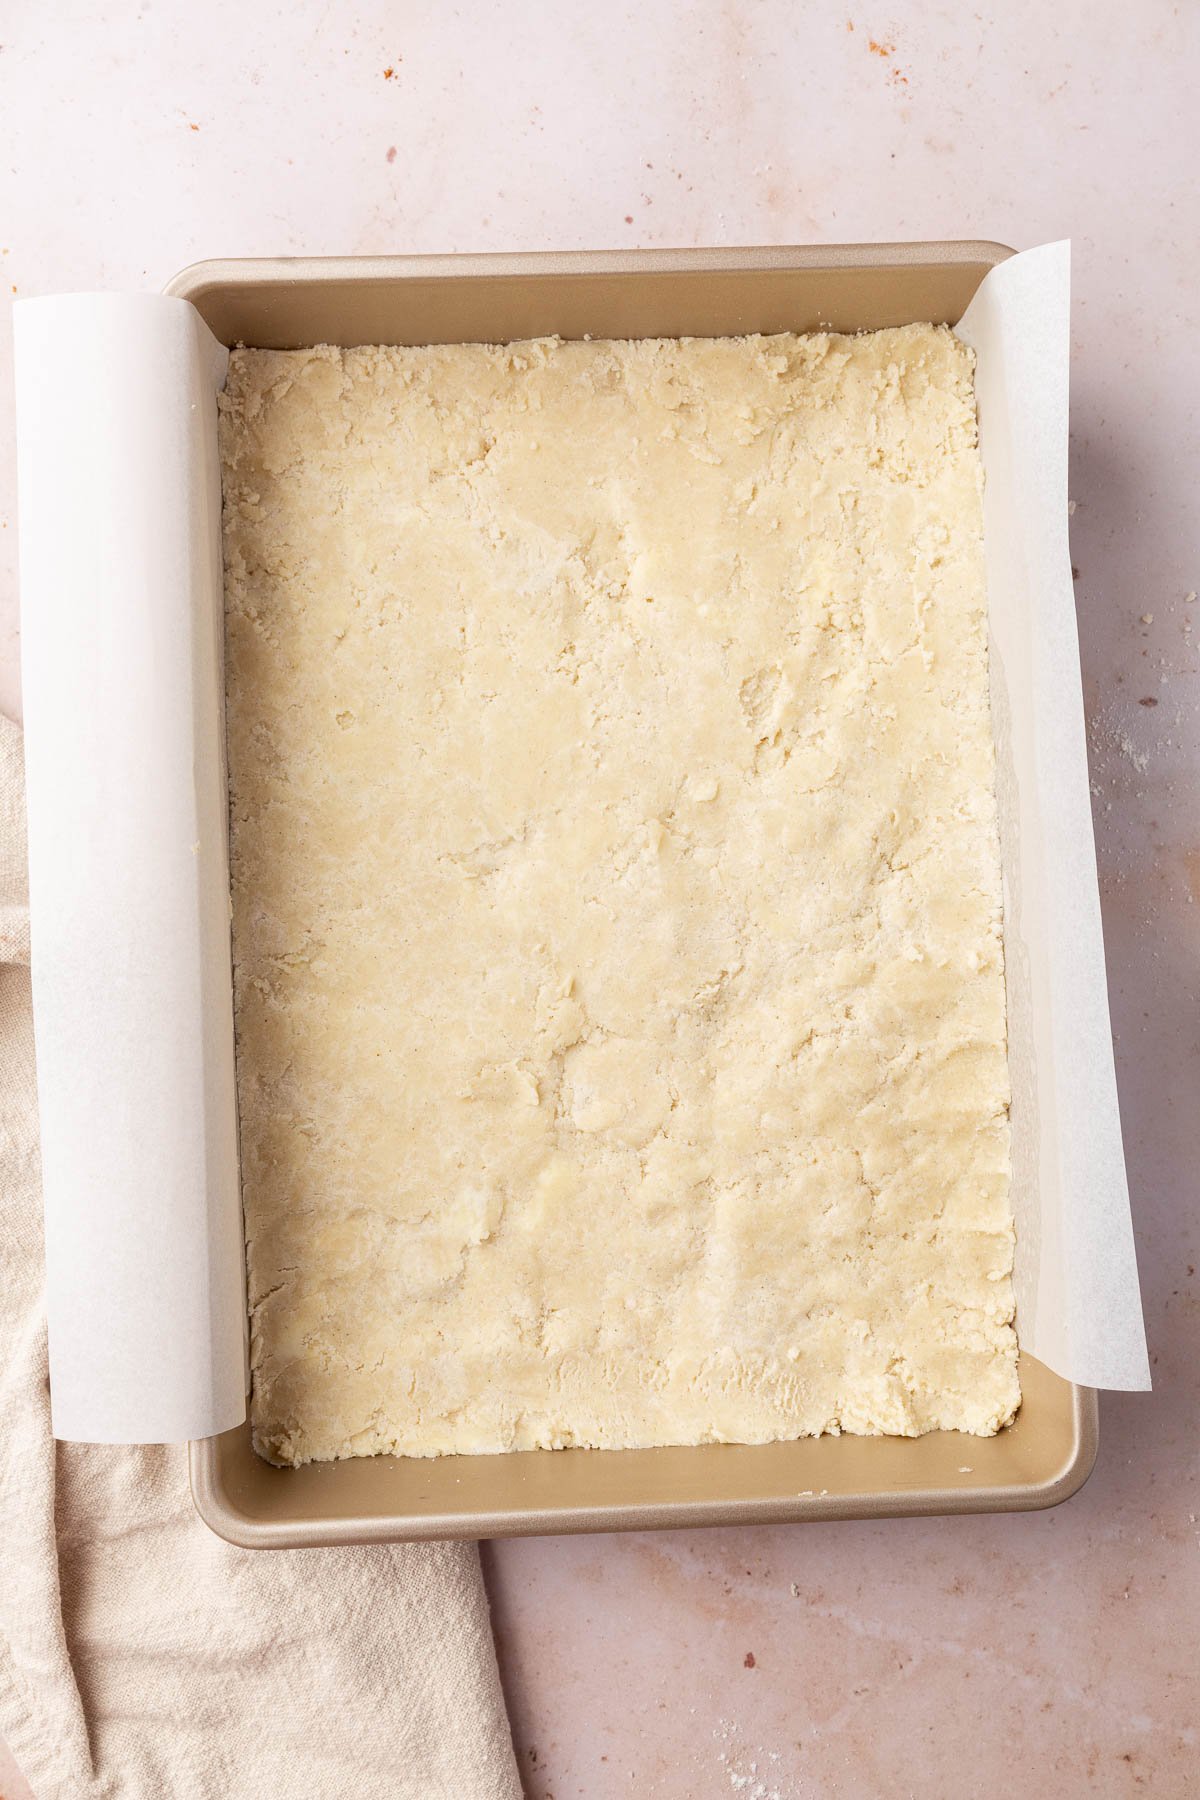 An overhead view of a rectangular baking pan lined with parchment paper that has a gluten-free shortbread crust pressed into it before baking in the oven.